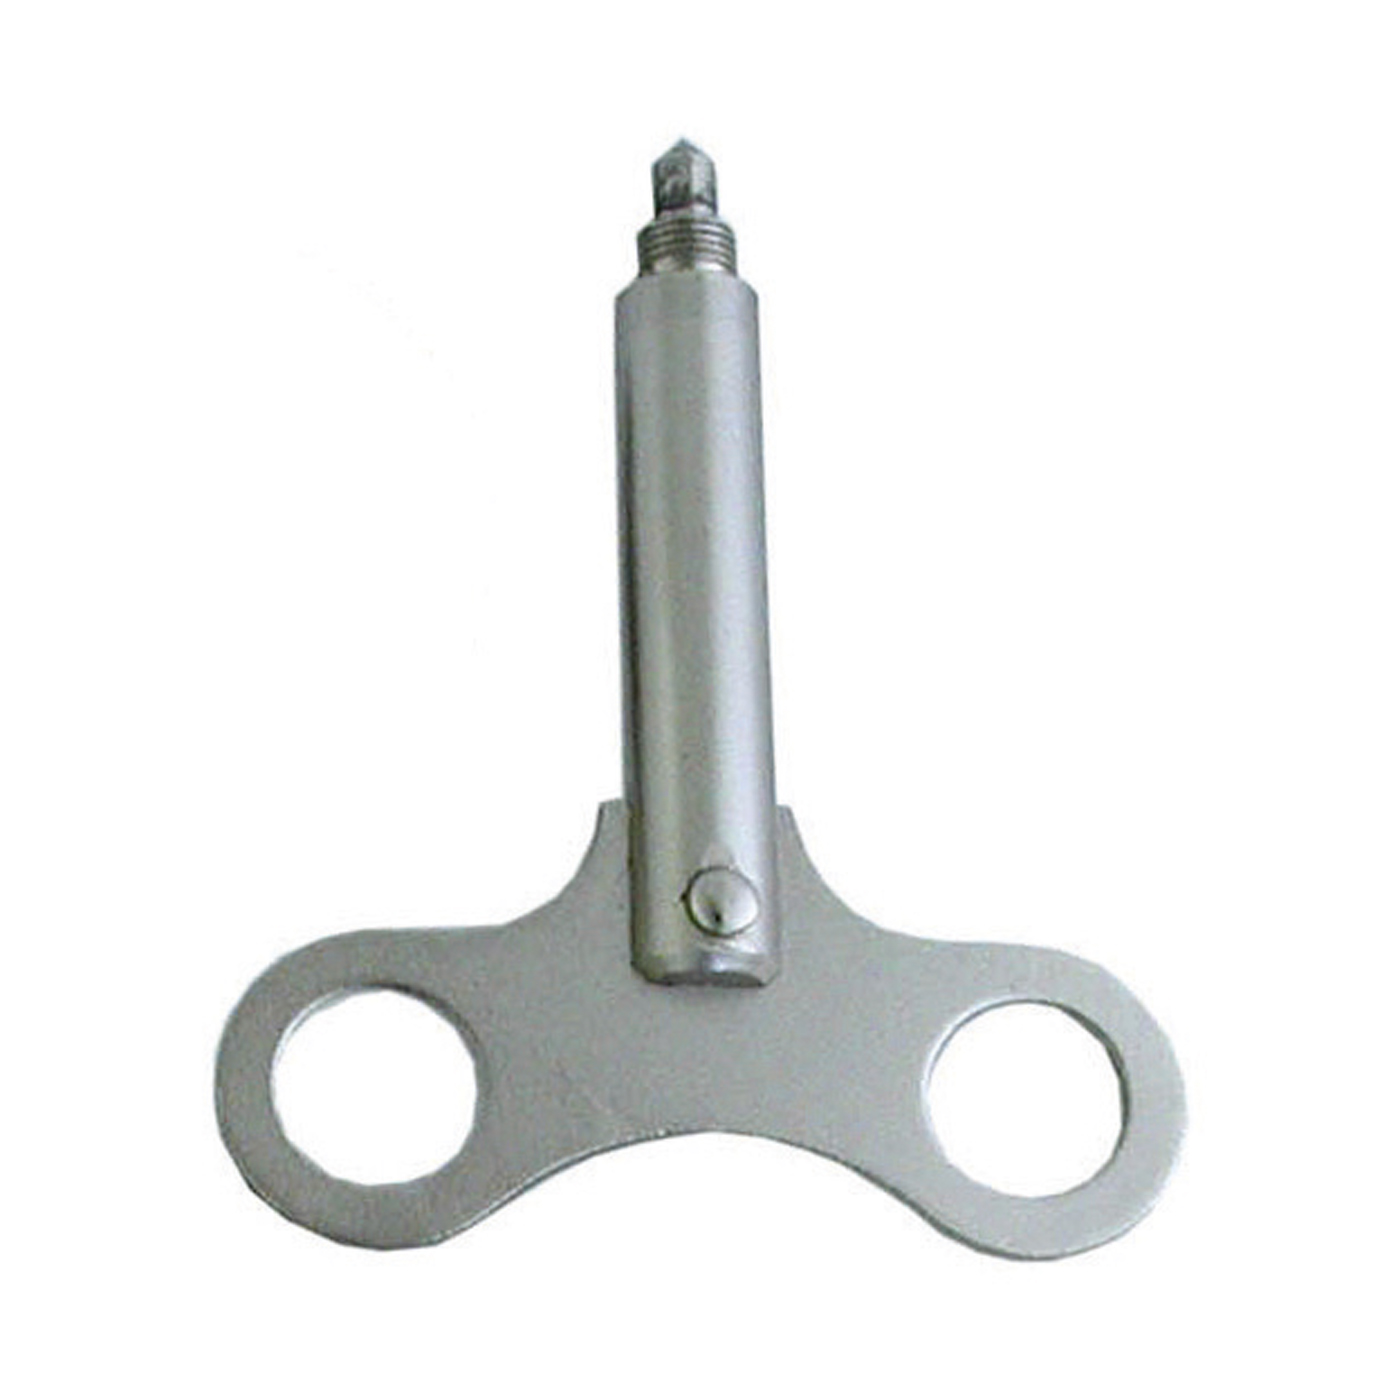 Replacement Screw, for Ring Cutting Pliers 160 mm - 1 piece